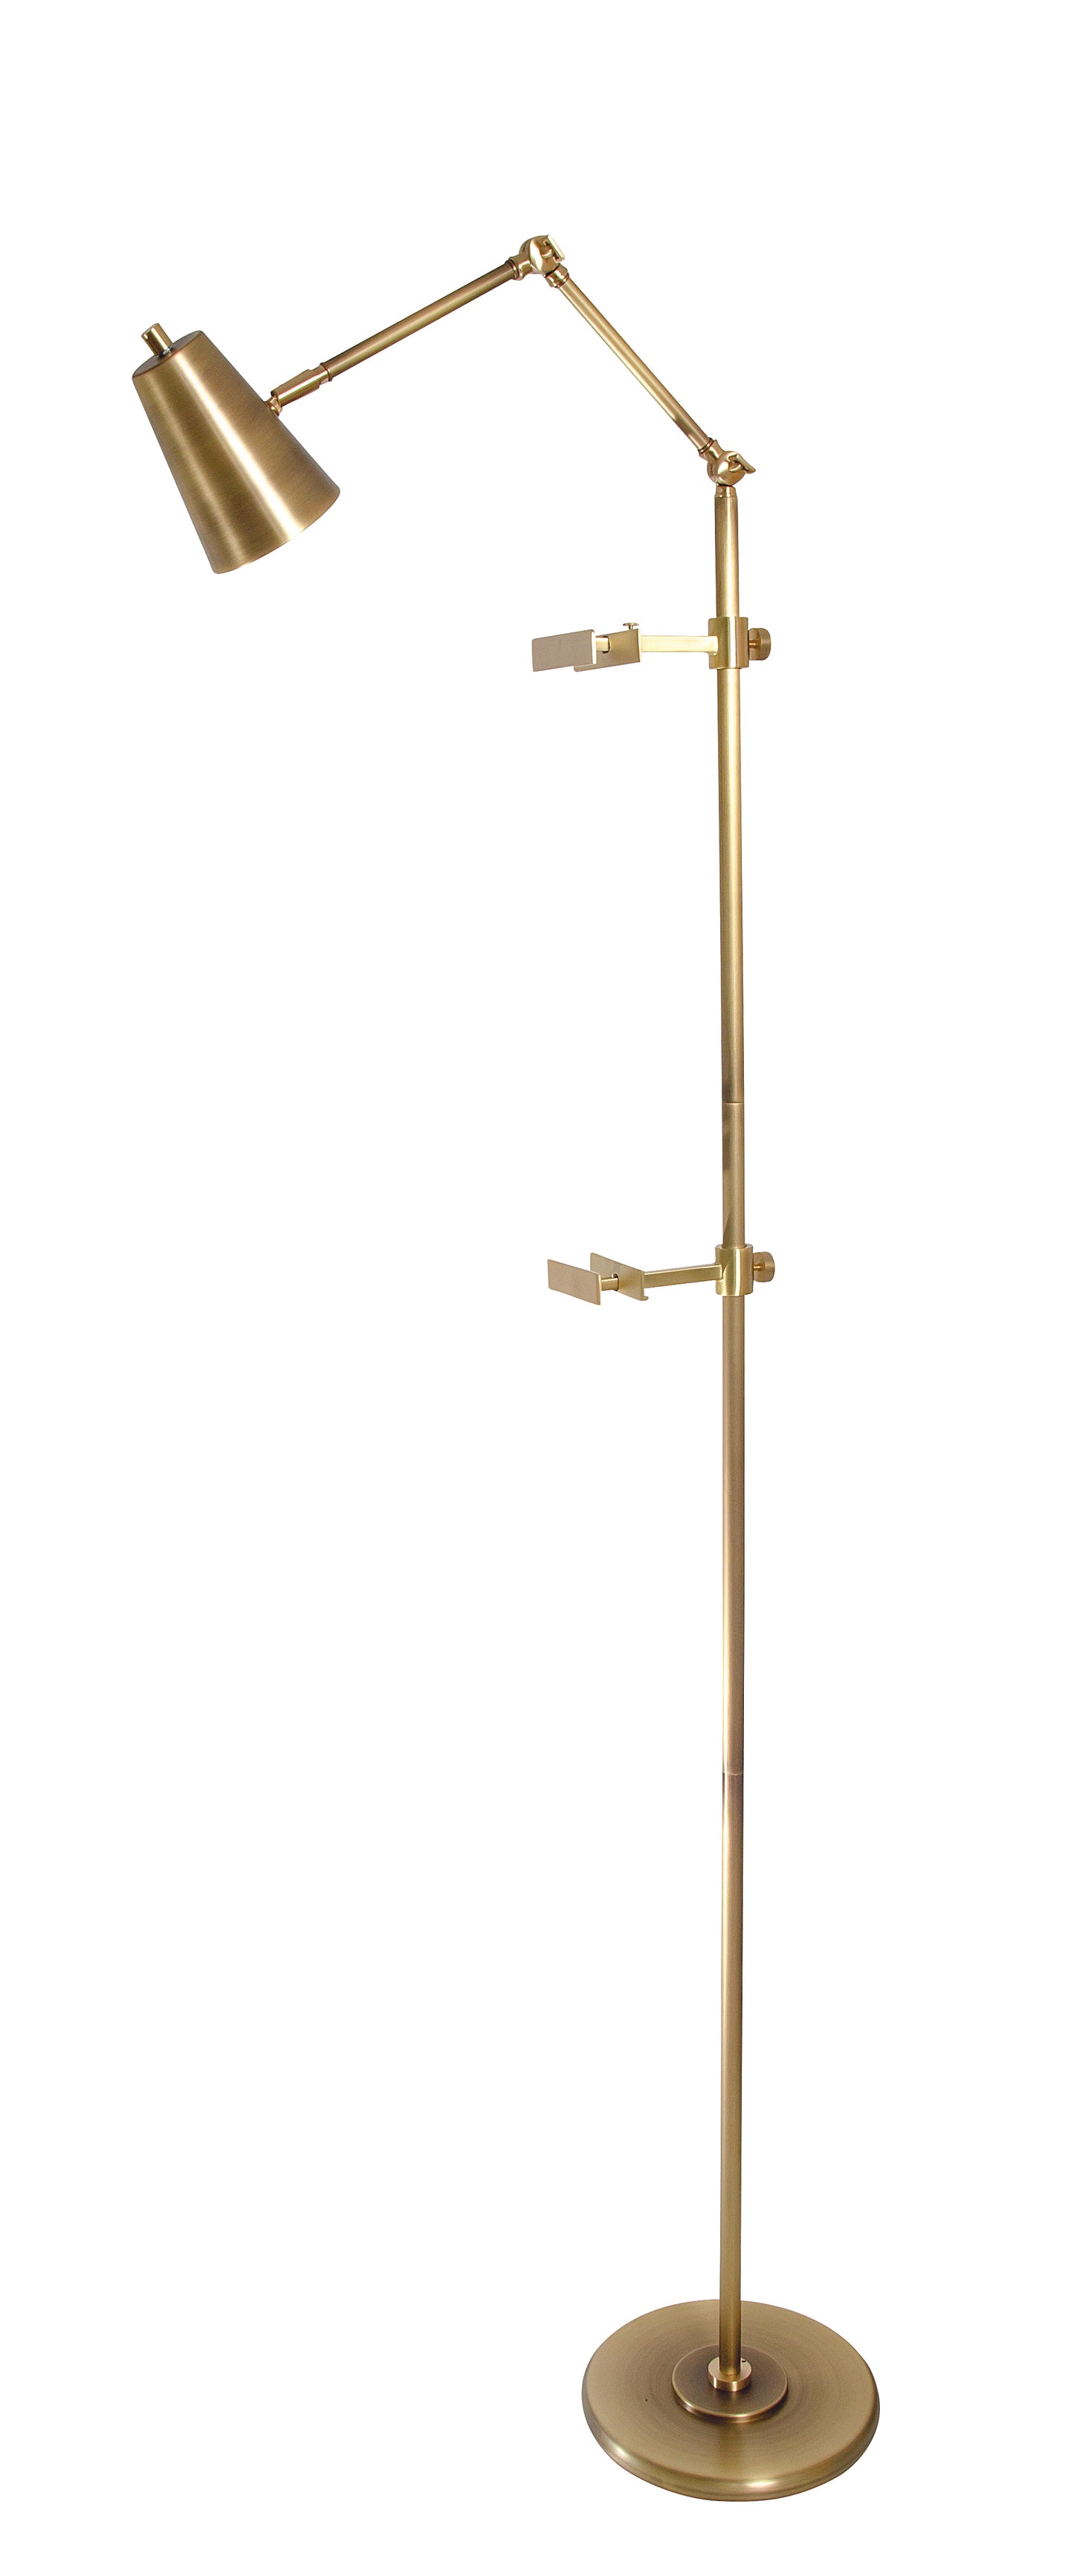 House of Troy River North Easel floor lamp antique brass and satin brass accents spot light shade RN301-AB/SB